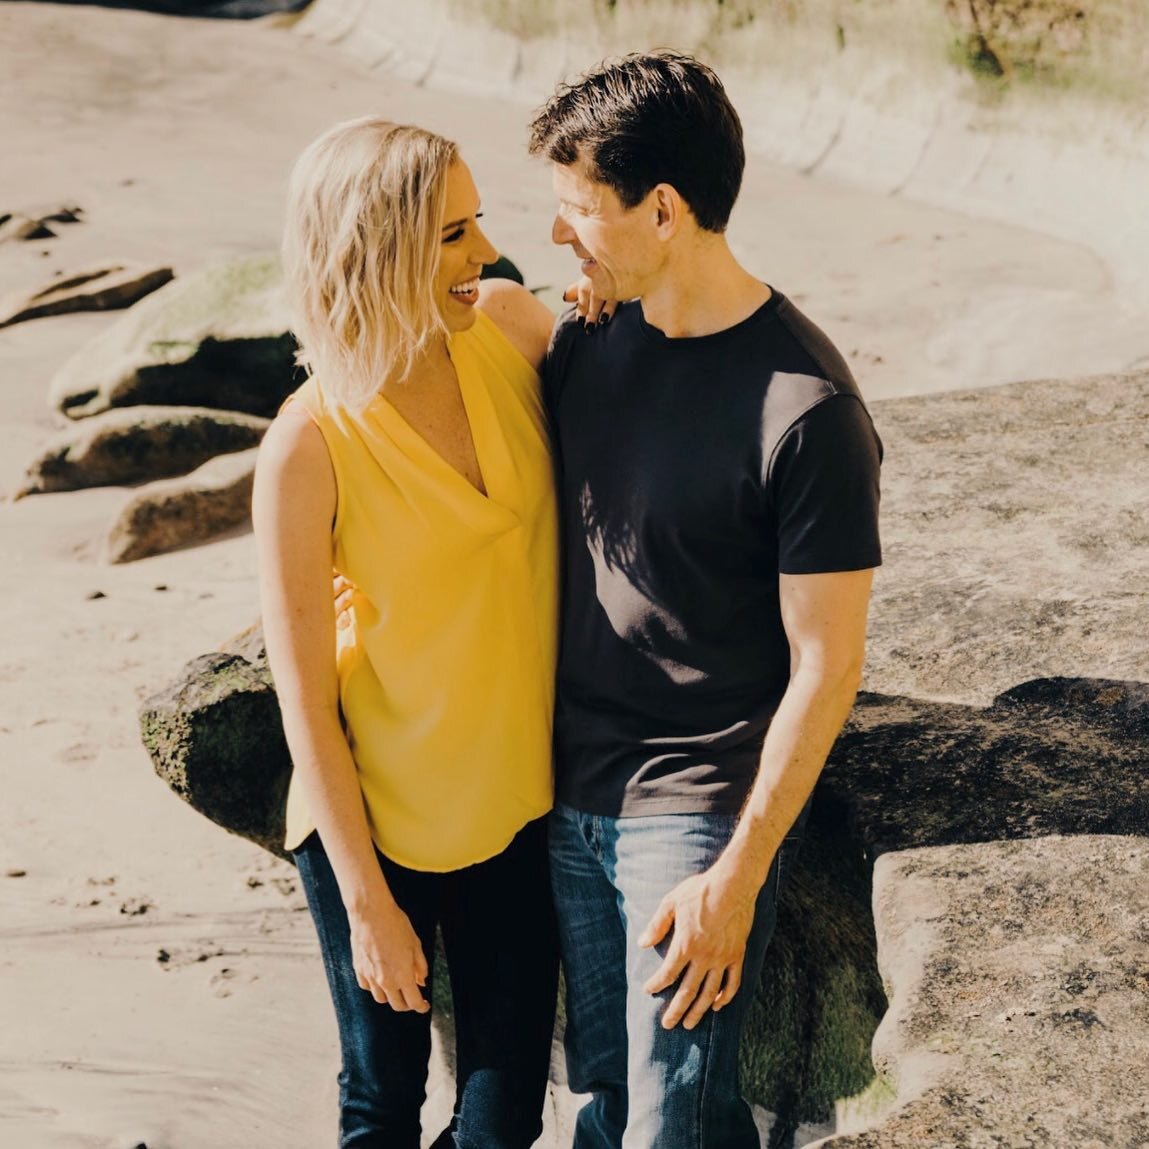 We're so excited to share our first featured couple of the week: Kate + Justin! Here is Kate's take on her experience:

&quot;Tawkify is not like other matchmaking services. My matchmaker was so personable and really took the time to get to know me a